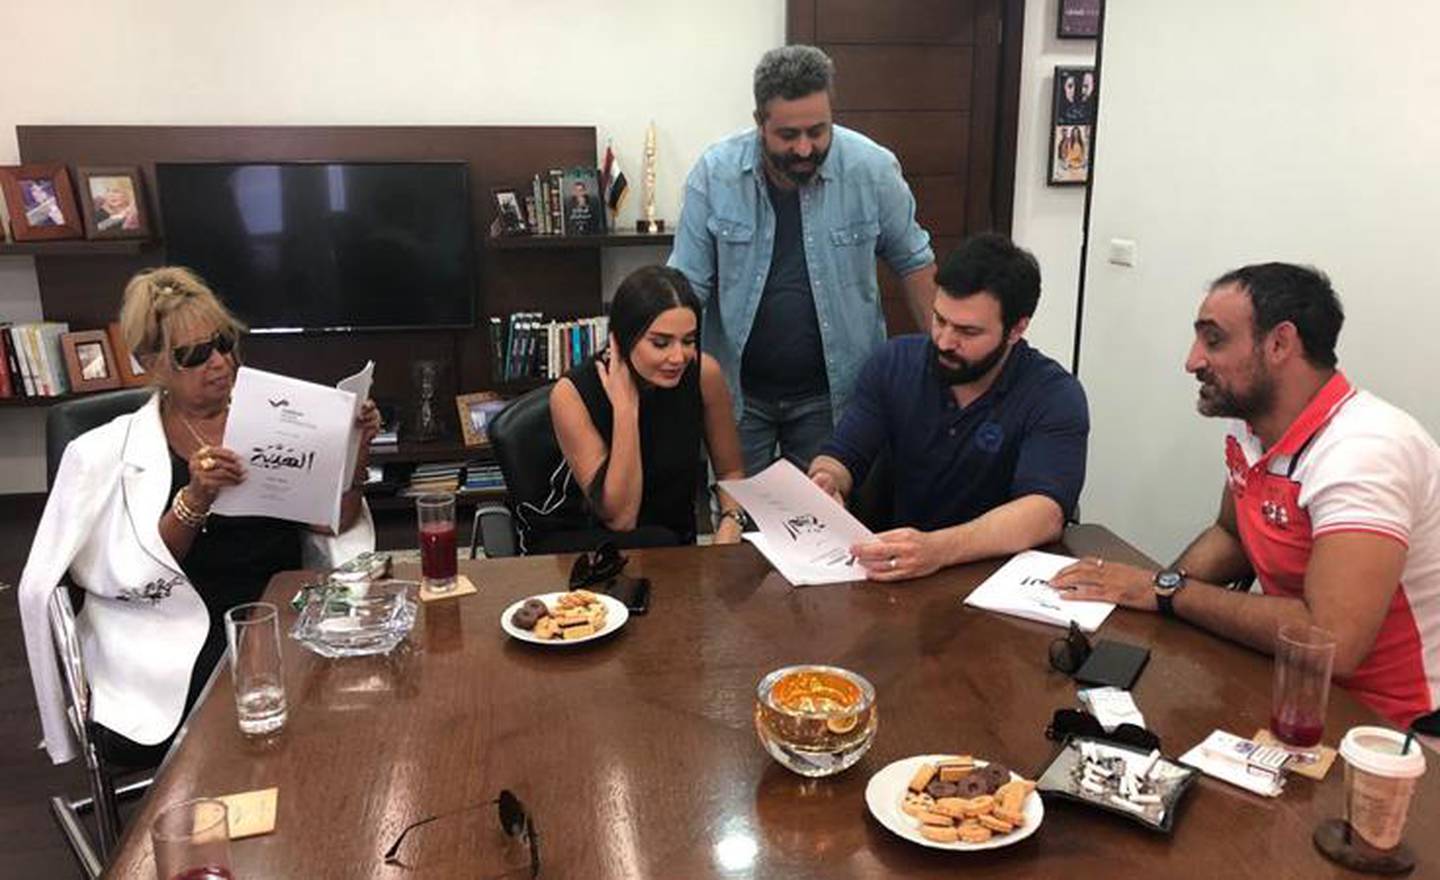 Al Hayba stars during a pre-production reading session. From left to right, Mona Wassef, Cyrine Abdelnour, Samer Al Barkawi, Taim Hassan, and Abdo Chahine